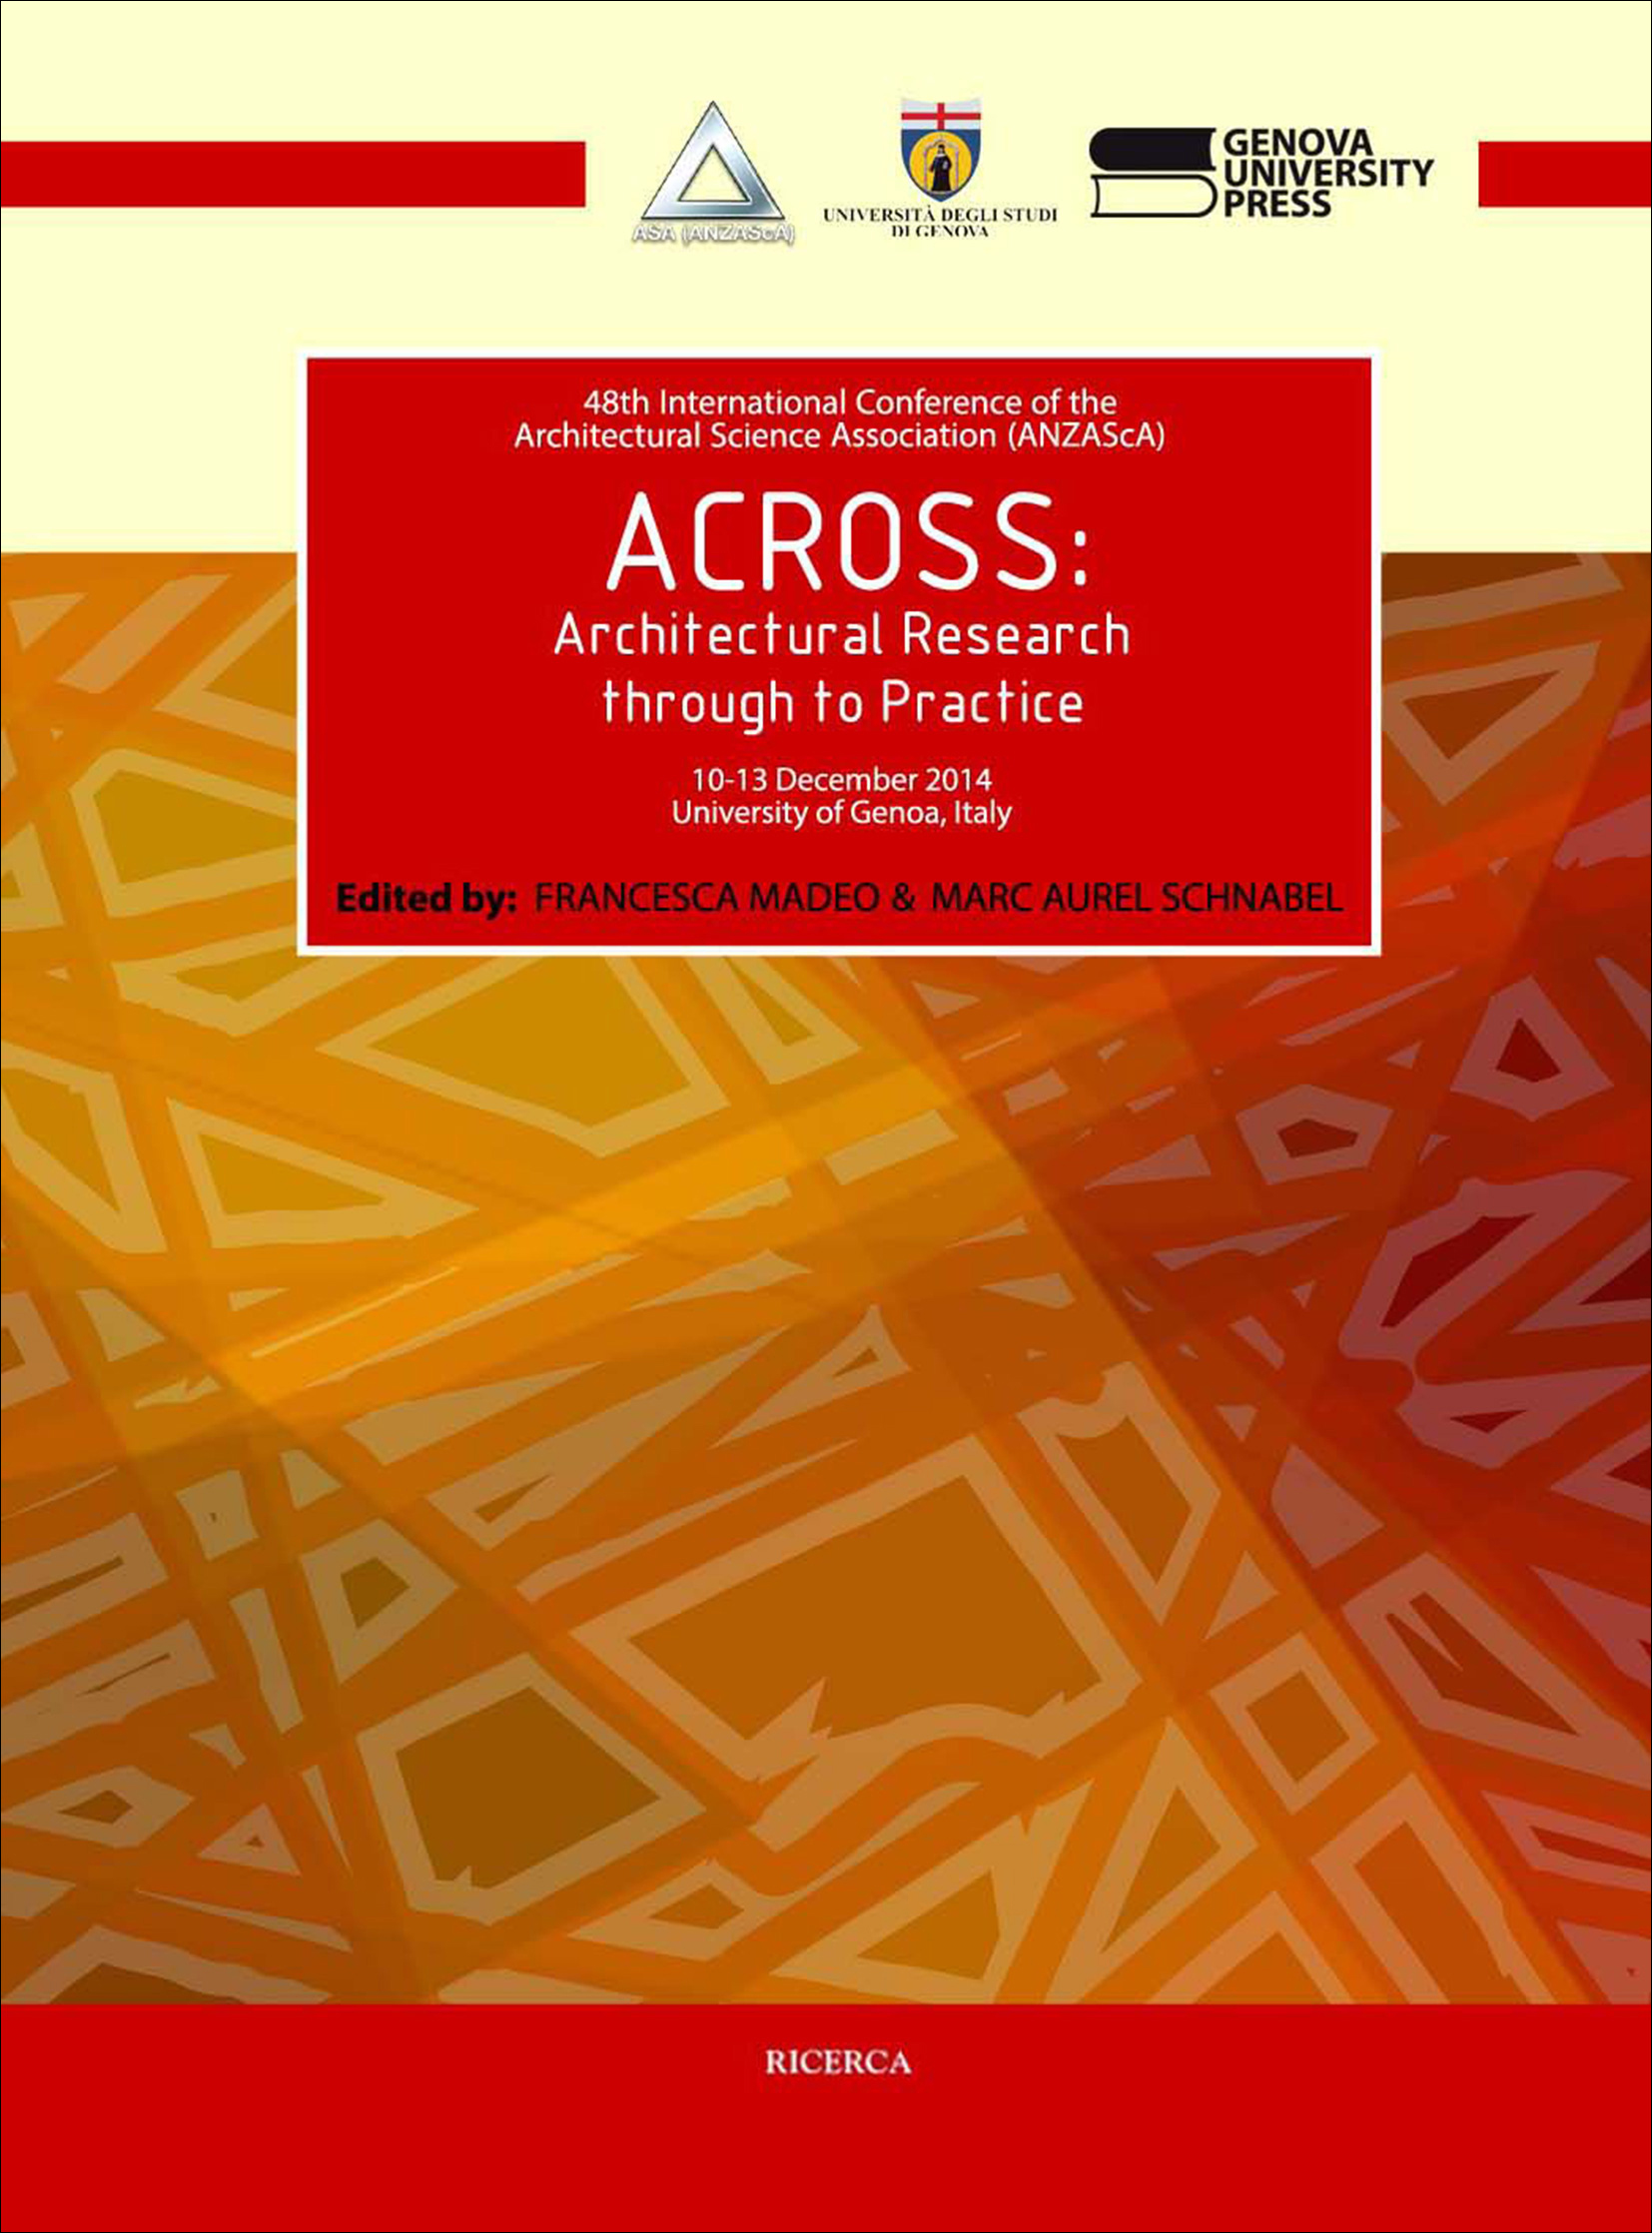 Across: Architectural Research through to practice